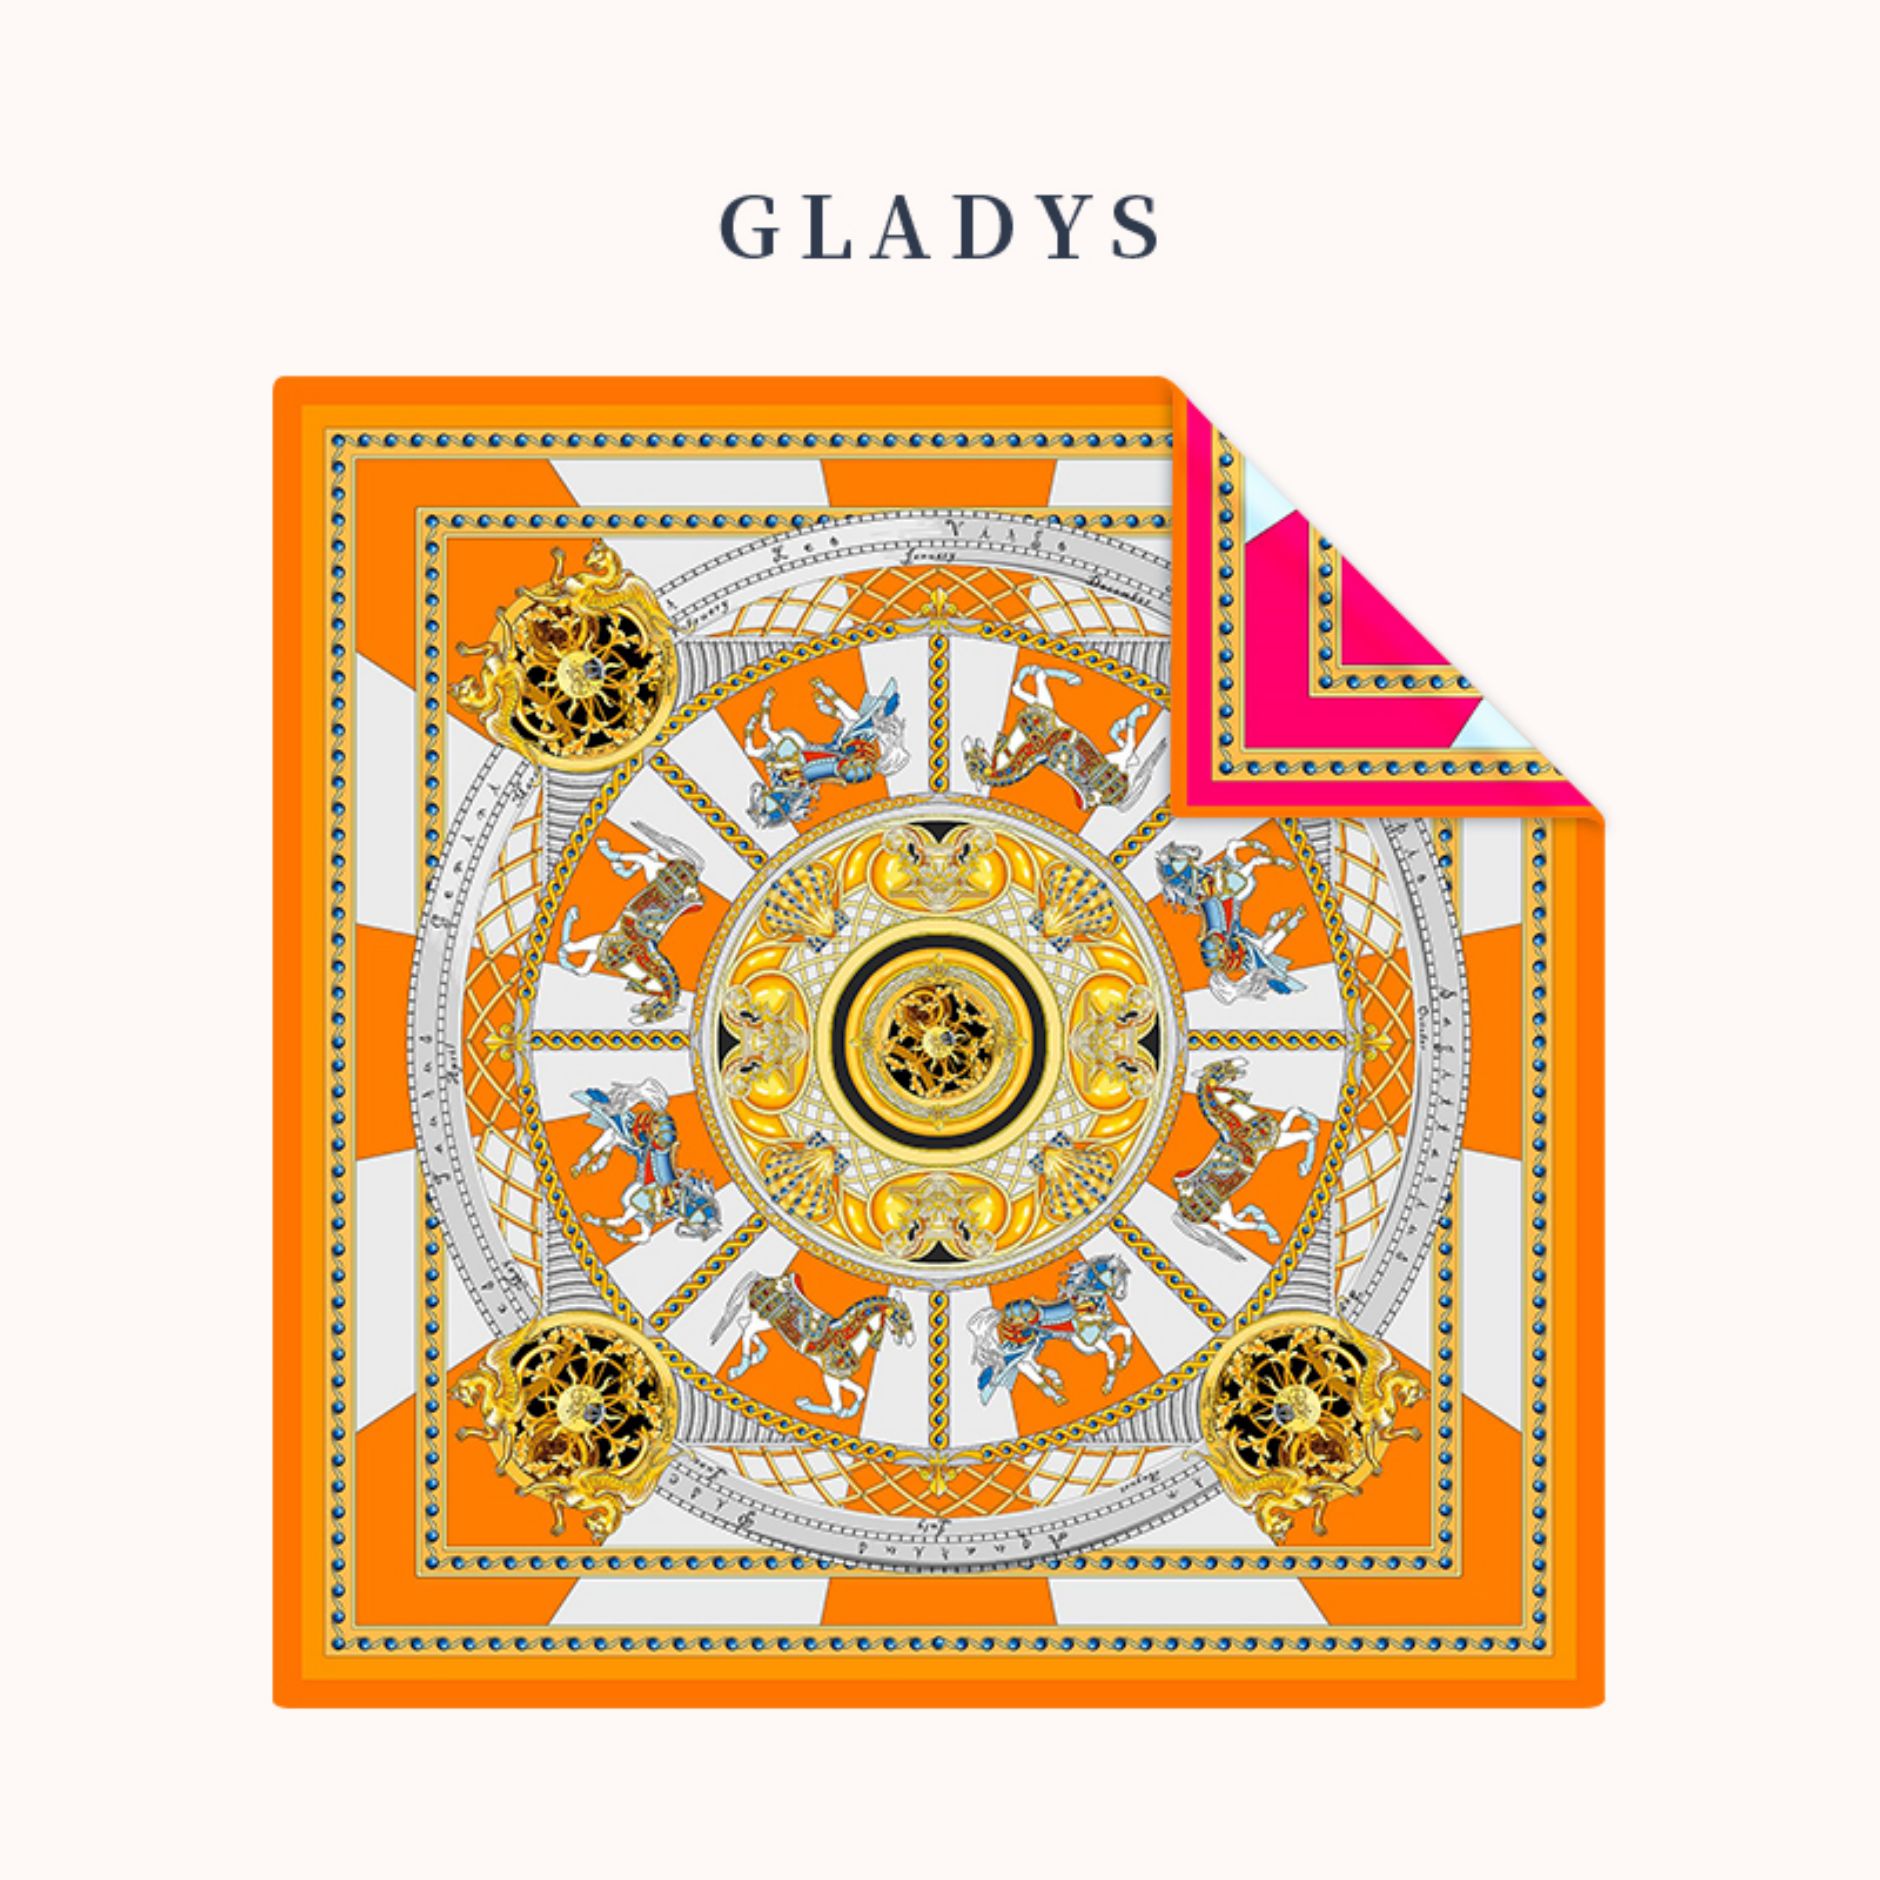 Luxurious Gladys Cloisonne Double-sided Heterochromatic Printed Silk Scarf for Women